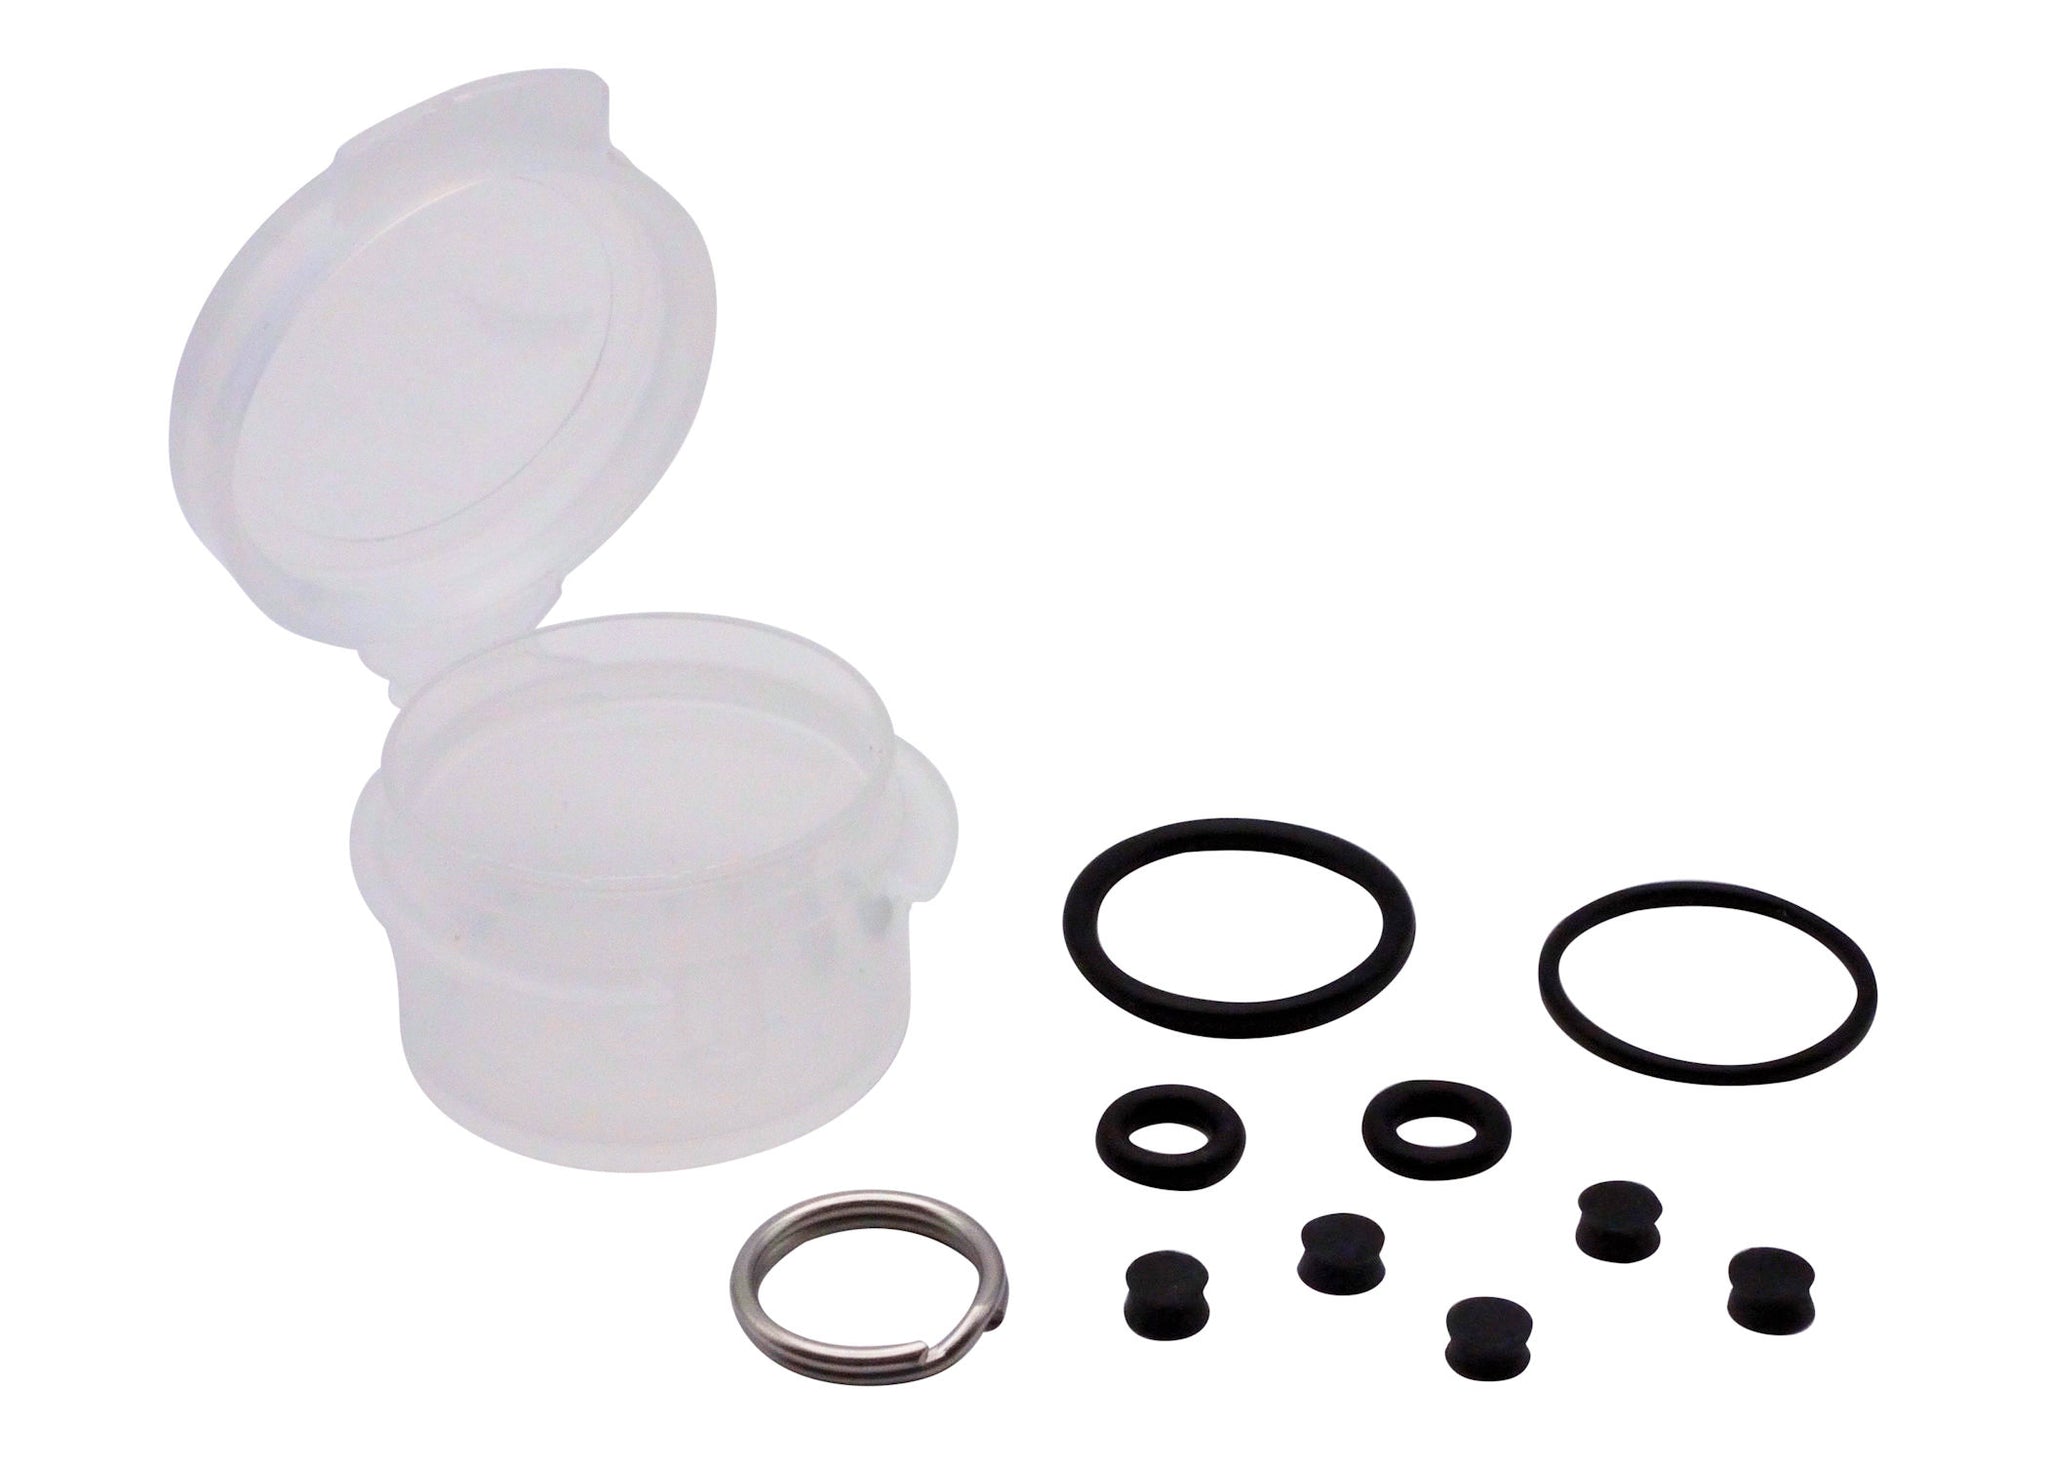 Isotope Reactor Accessory Kit